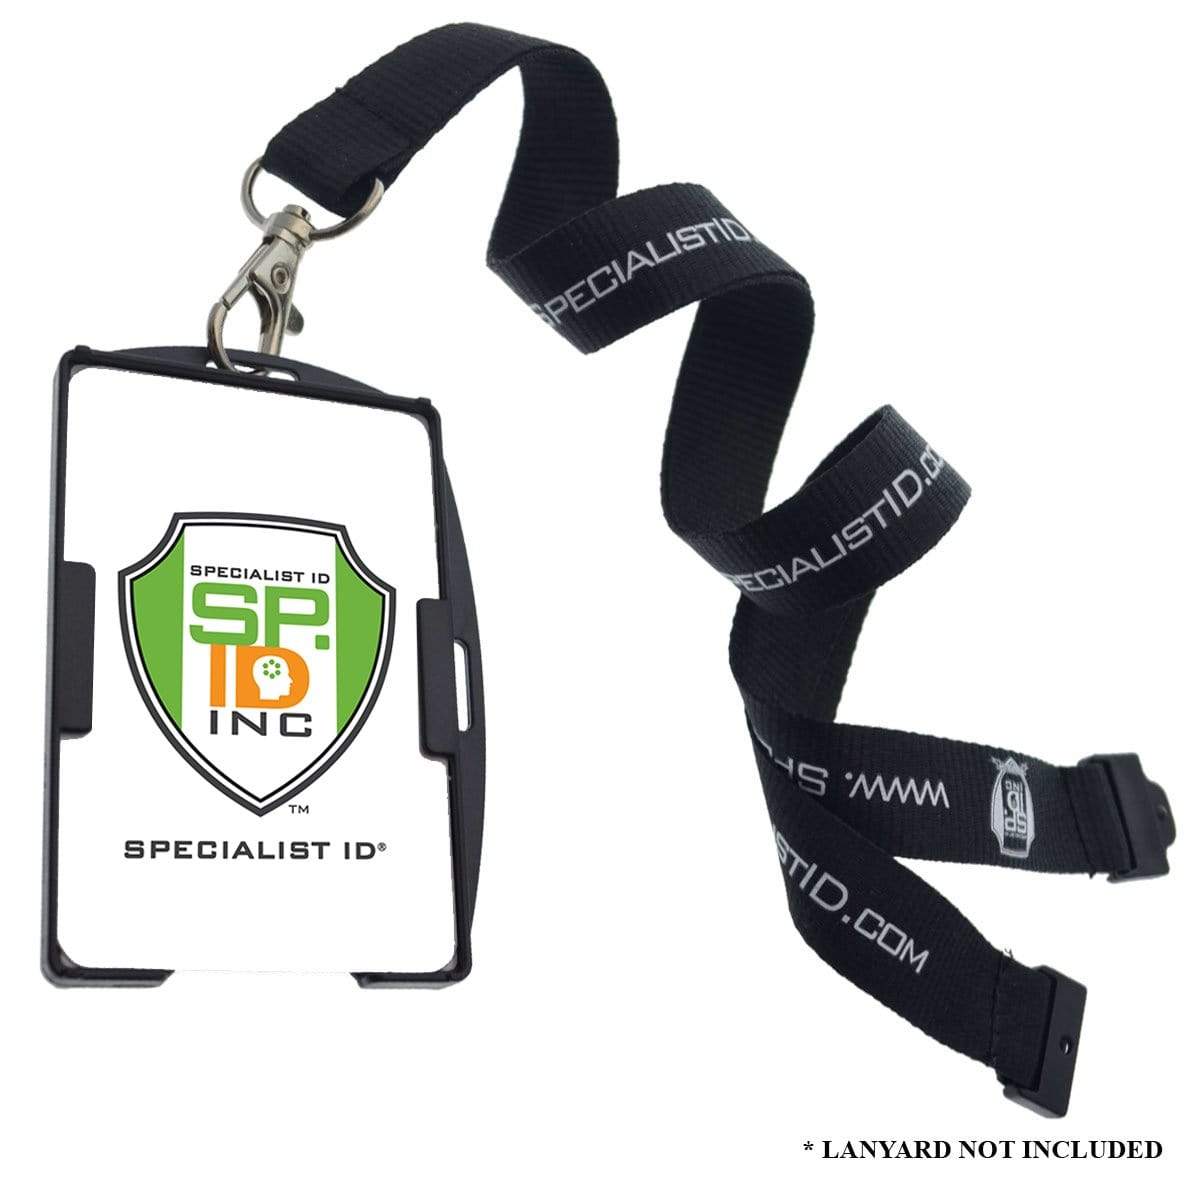 A black SkimSAFE FIPS 201 RFID Blocking 2-Card ID Holder (AH-210) with a clip, displaying a logo and text. The lanyard is not included as noted by the text on the image.